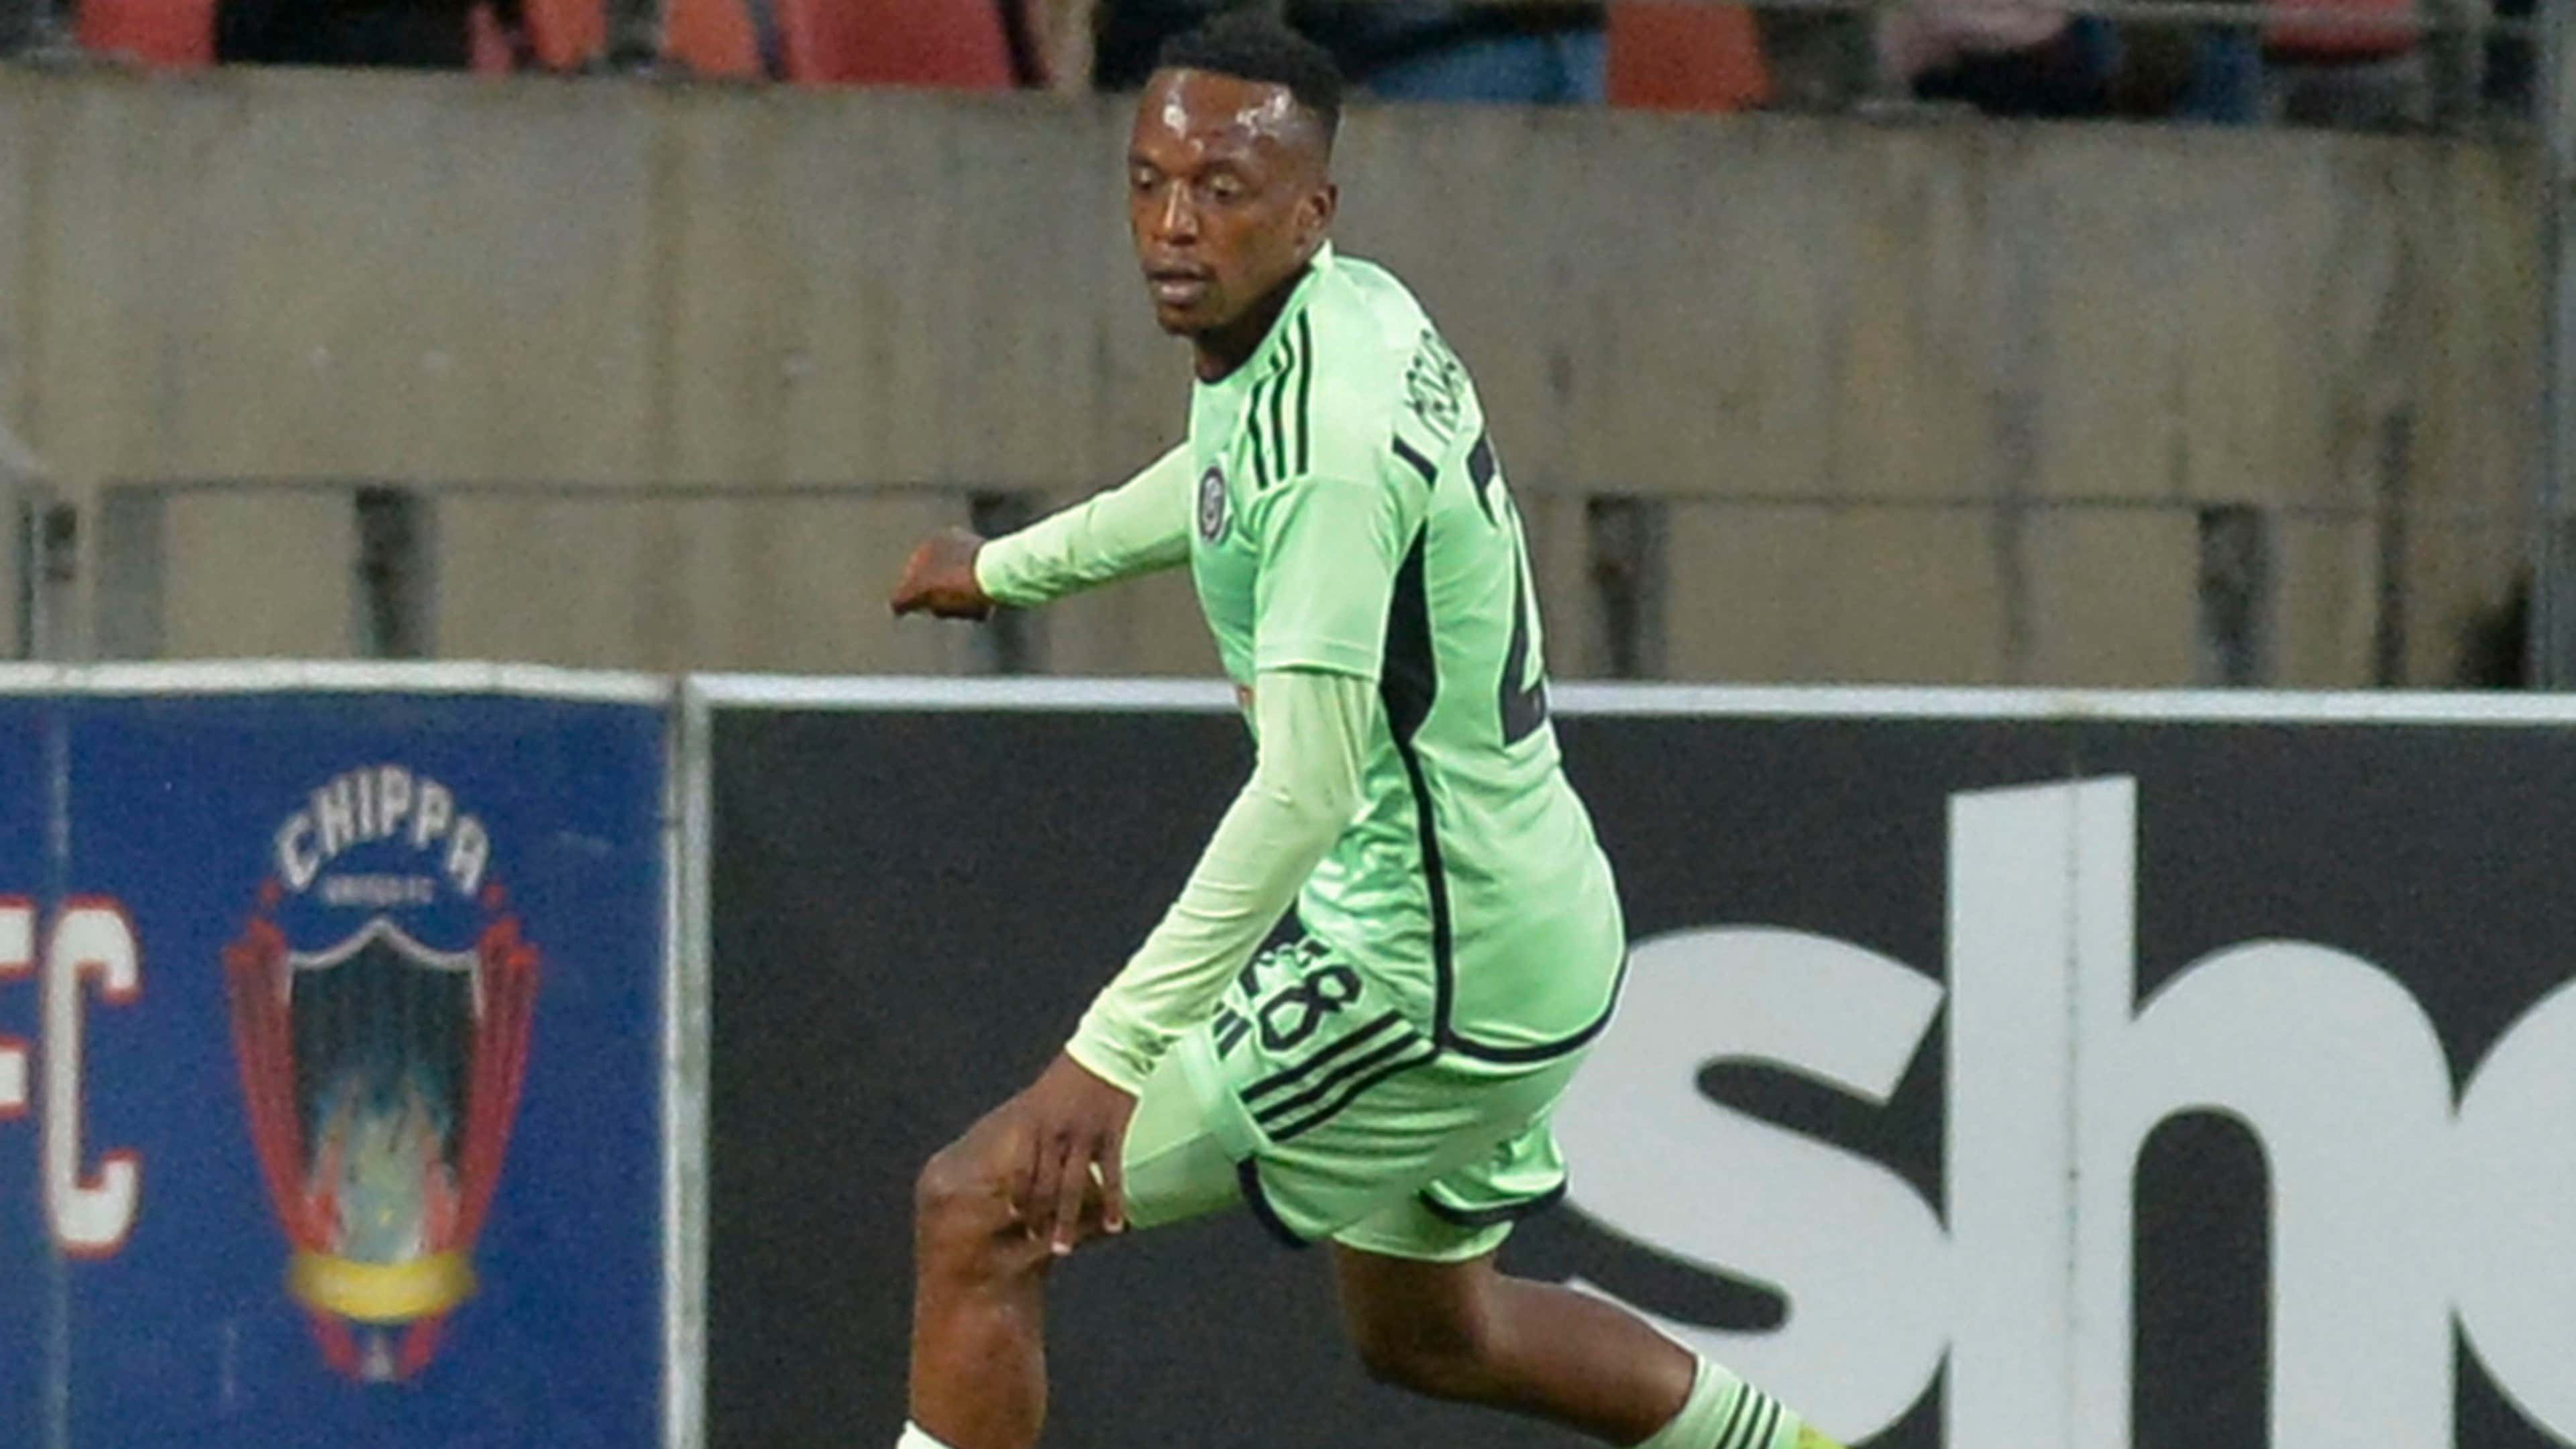 After pre-season hype, Orlando Pirates new boy Maswanganyi disappears but  explains transfer - 'I didn't expect it